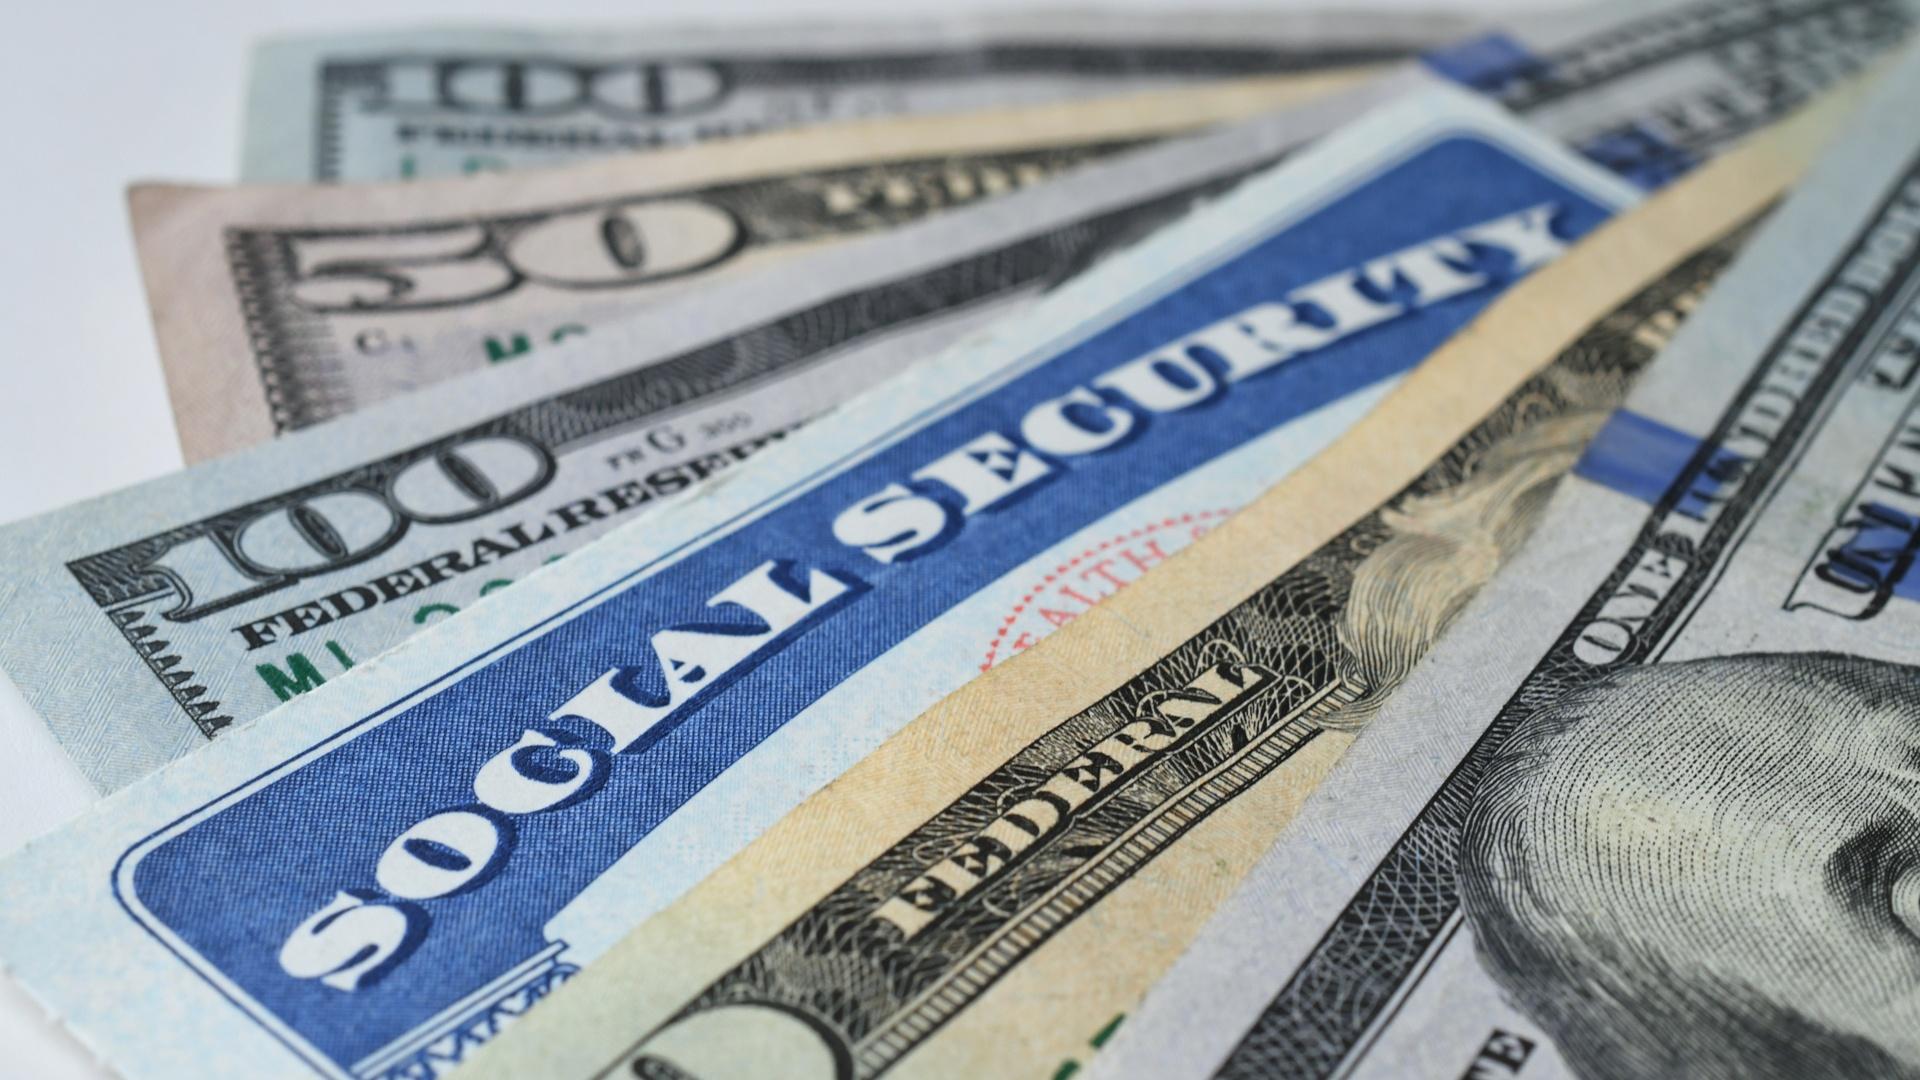 Social Security Card and money